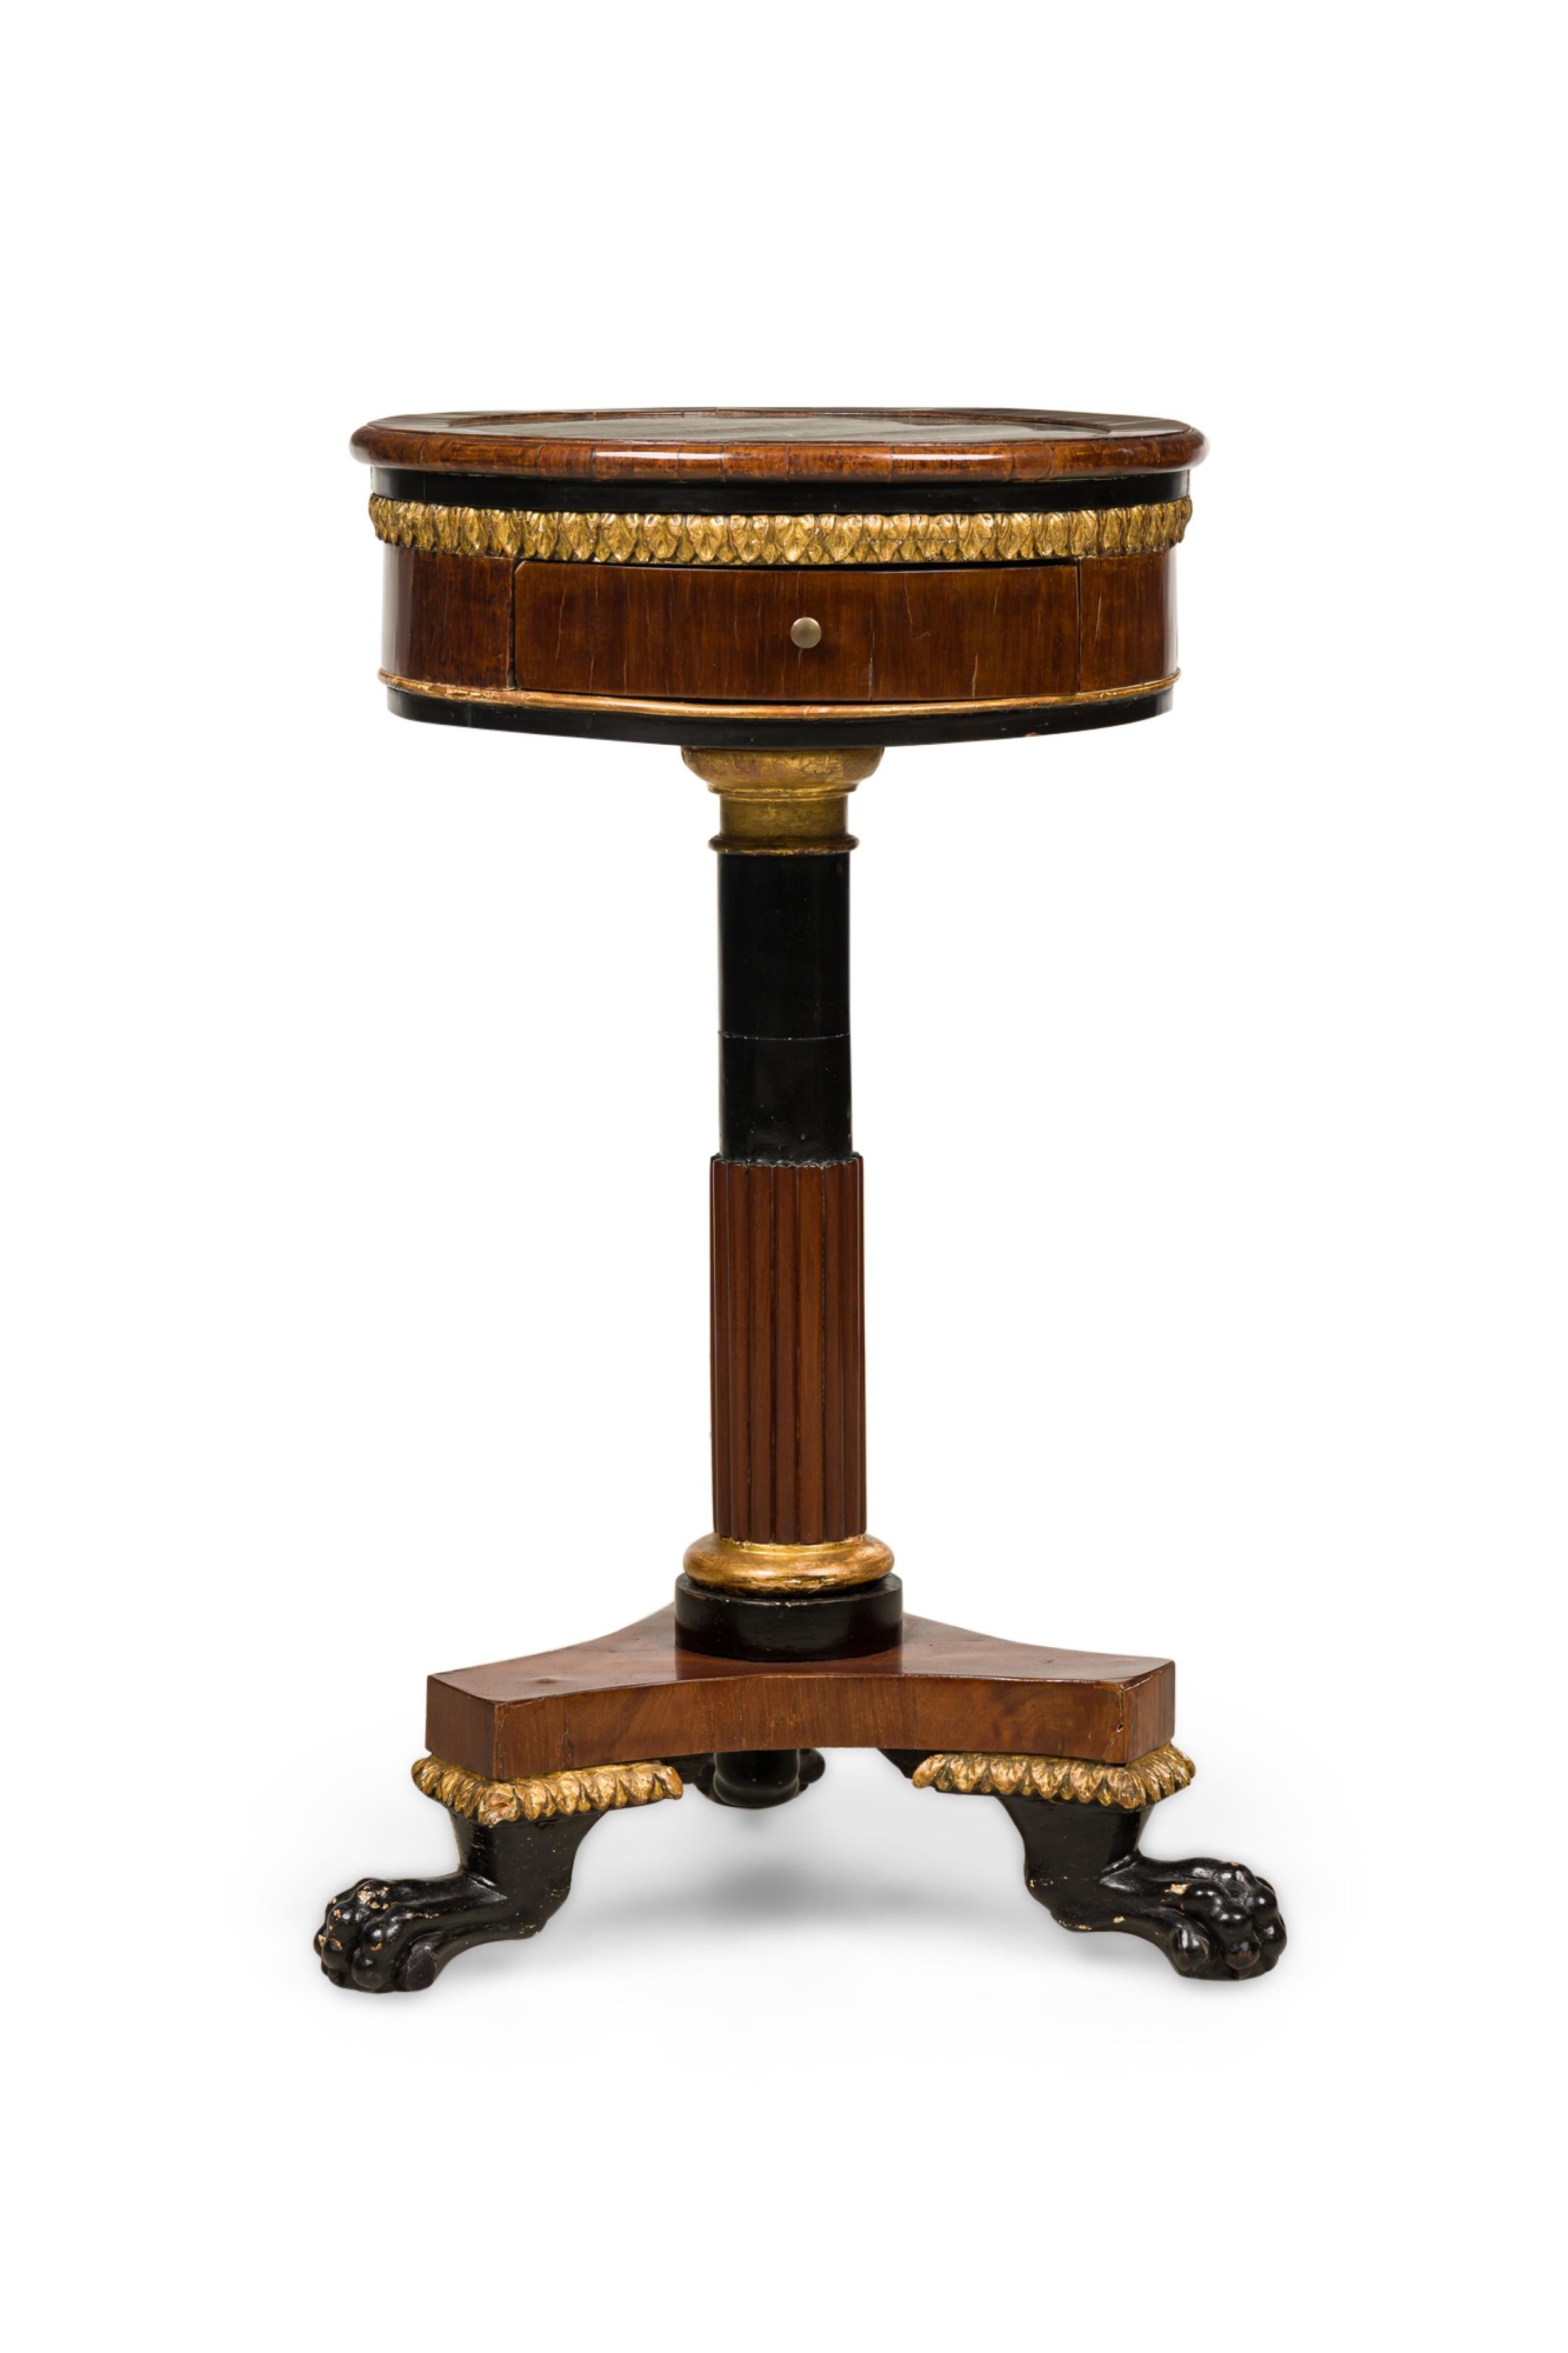 Pair of Italian Neoclassicalal Mahogany and Marble Gueirdon End Table In Good Condition For Sale In New York, NY